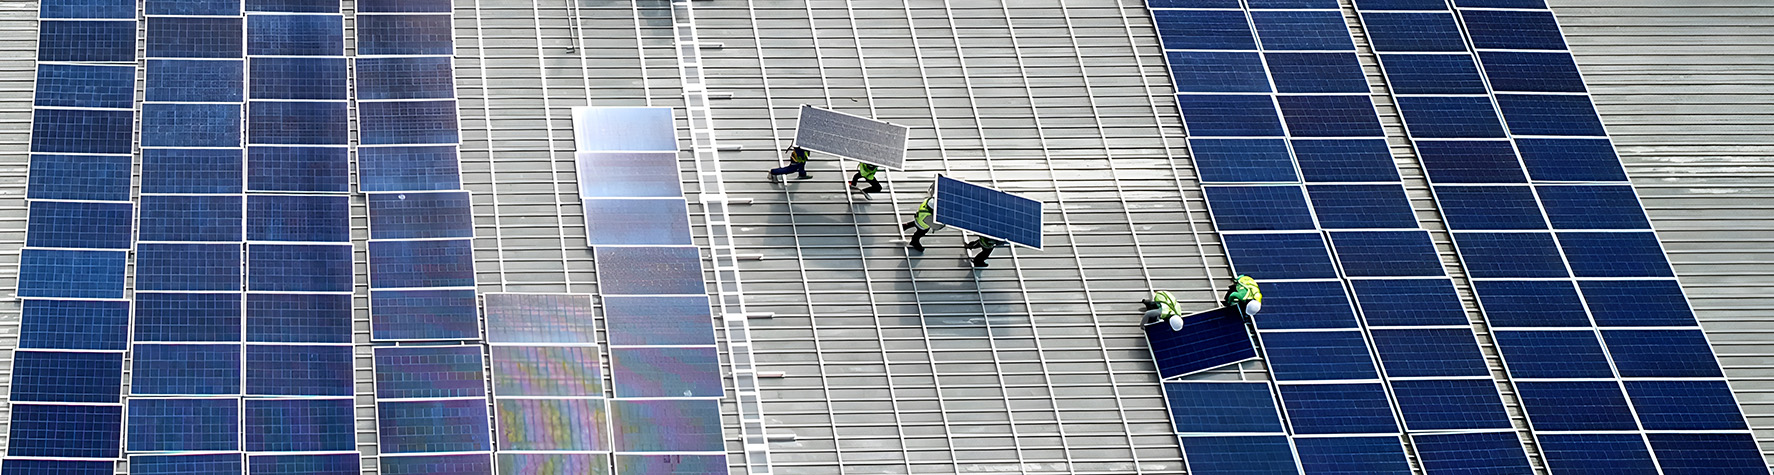 Aerial,View,Of,Photovoltaic,Solar,Panels,Installation,Work,Activity,At